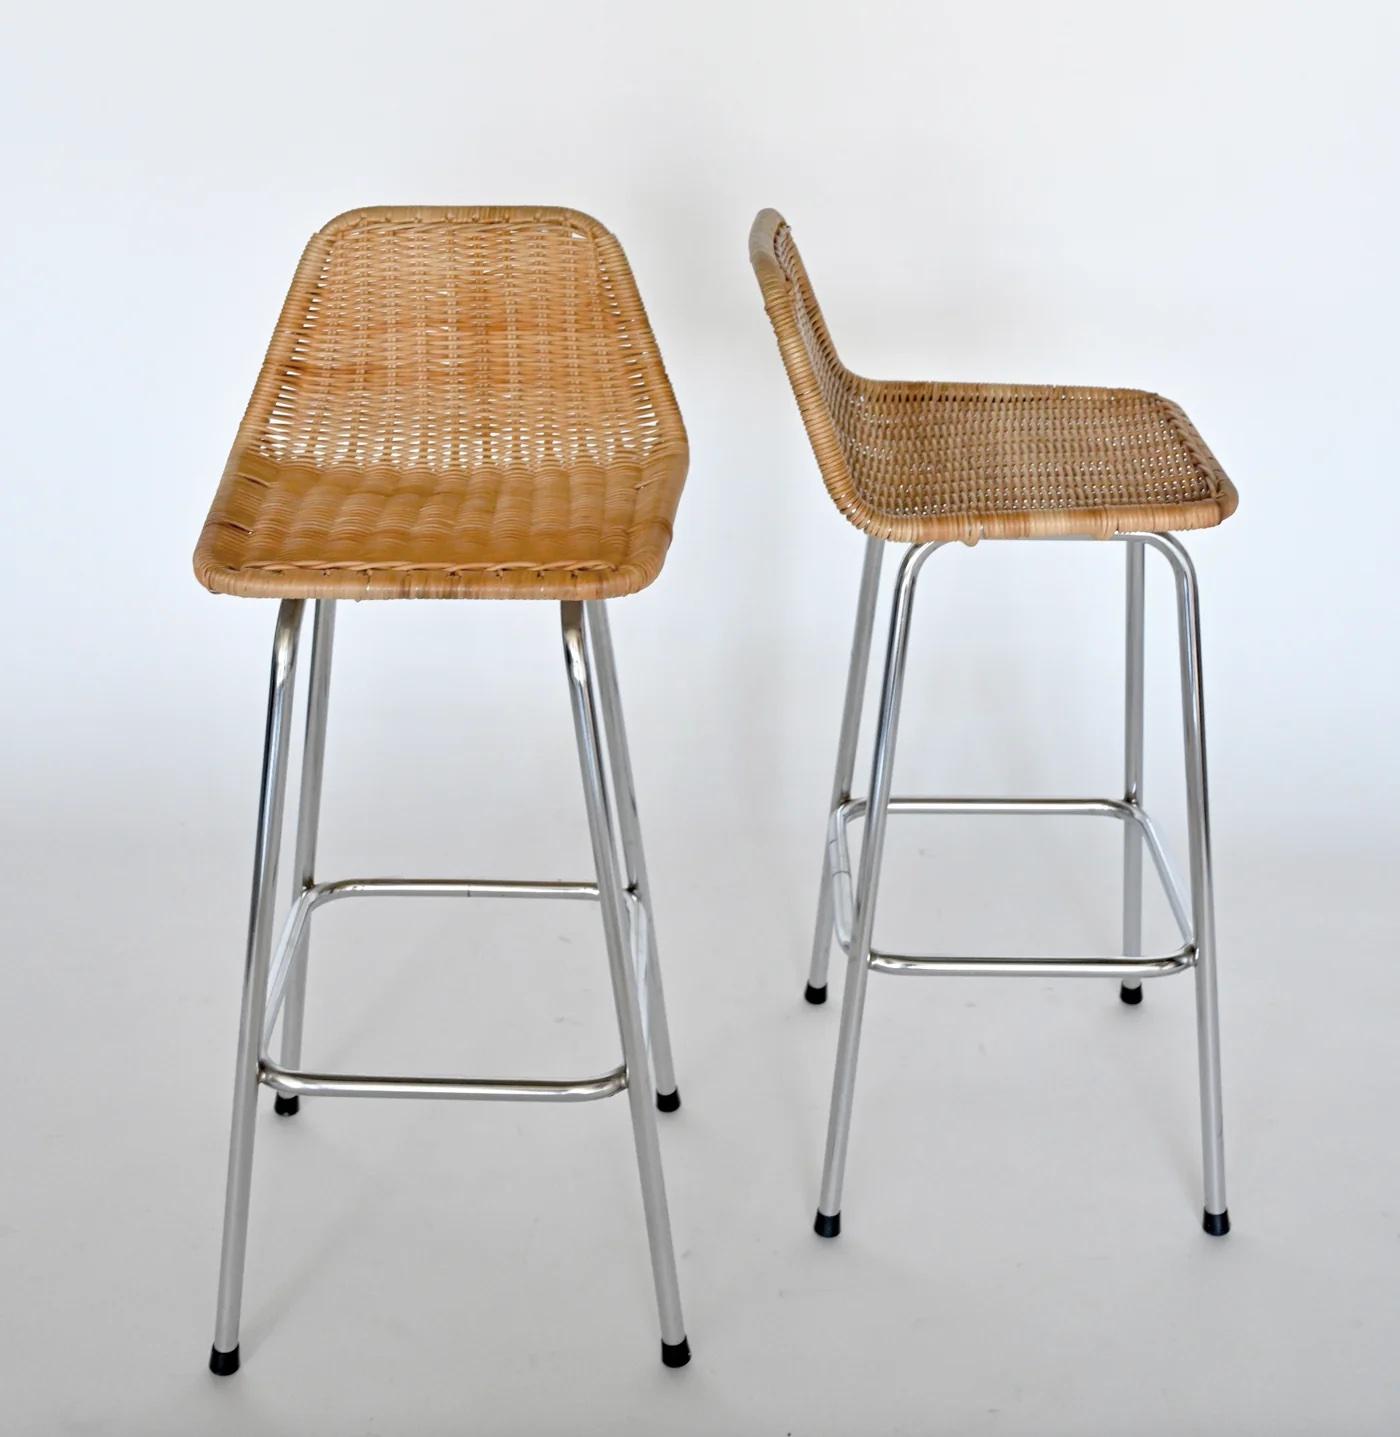 Pair of rattan and chrome counterstools by Dirk van Sliedregt for Rohe Noordwolde. Netherlands circa 1960's. 